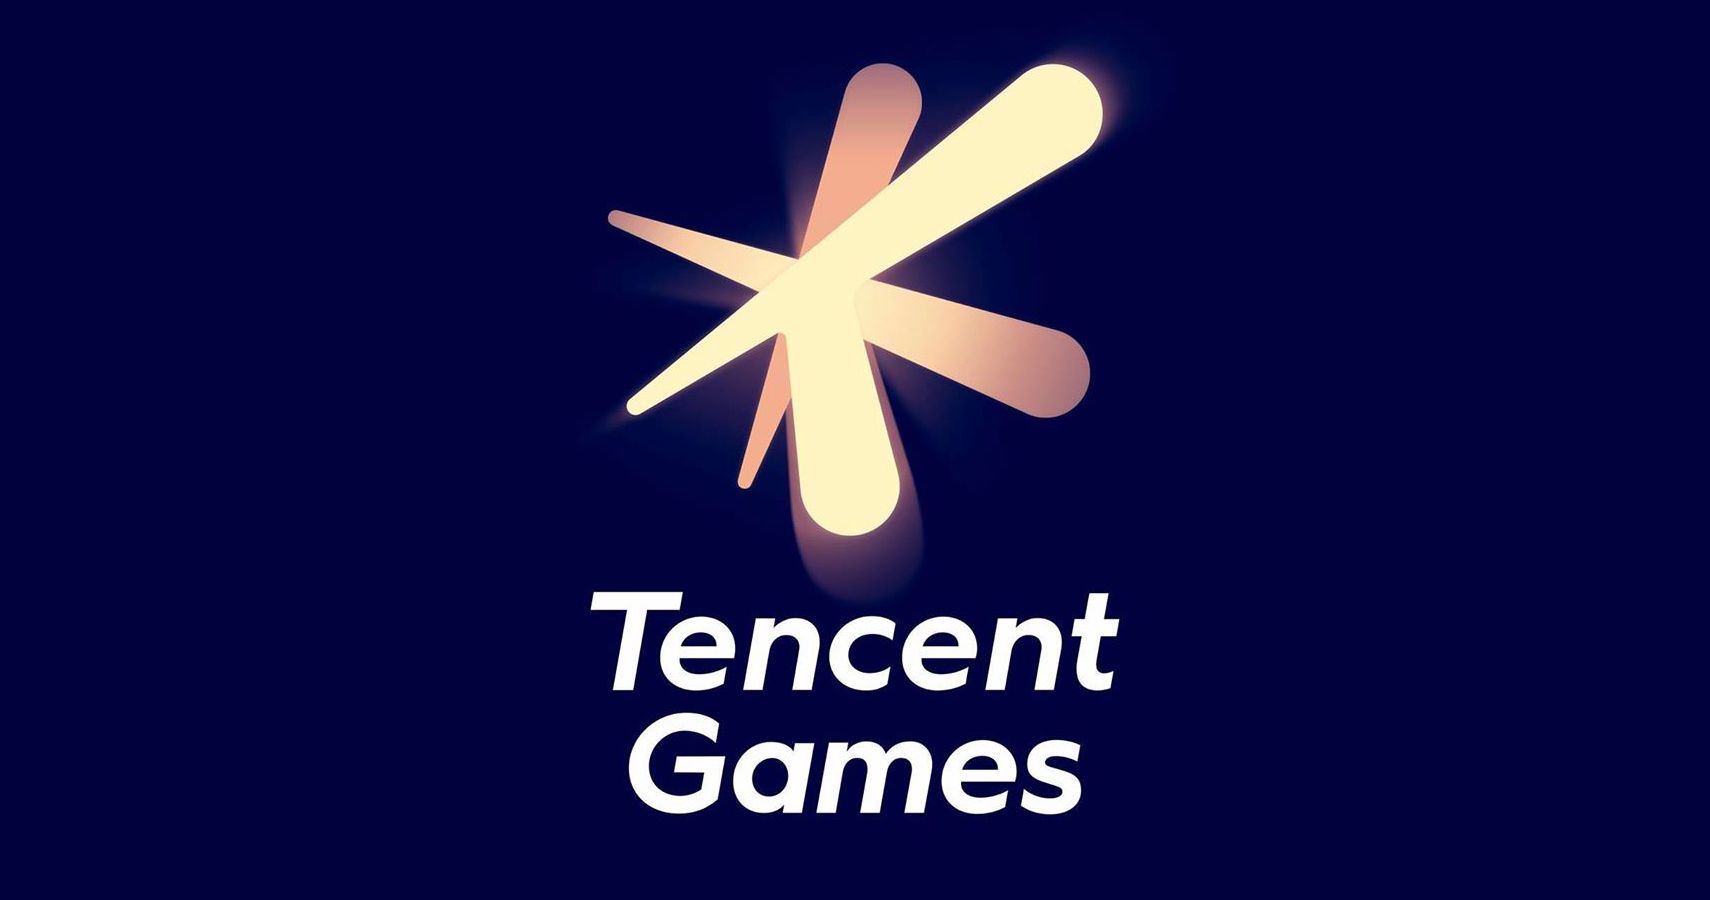 Fortnite and NBA2K Online 2 are now on Tencent's cloud gaming service START